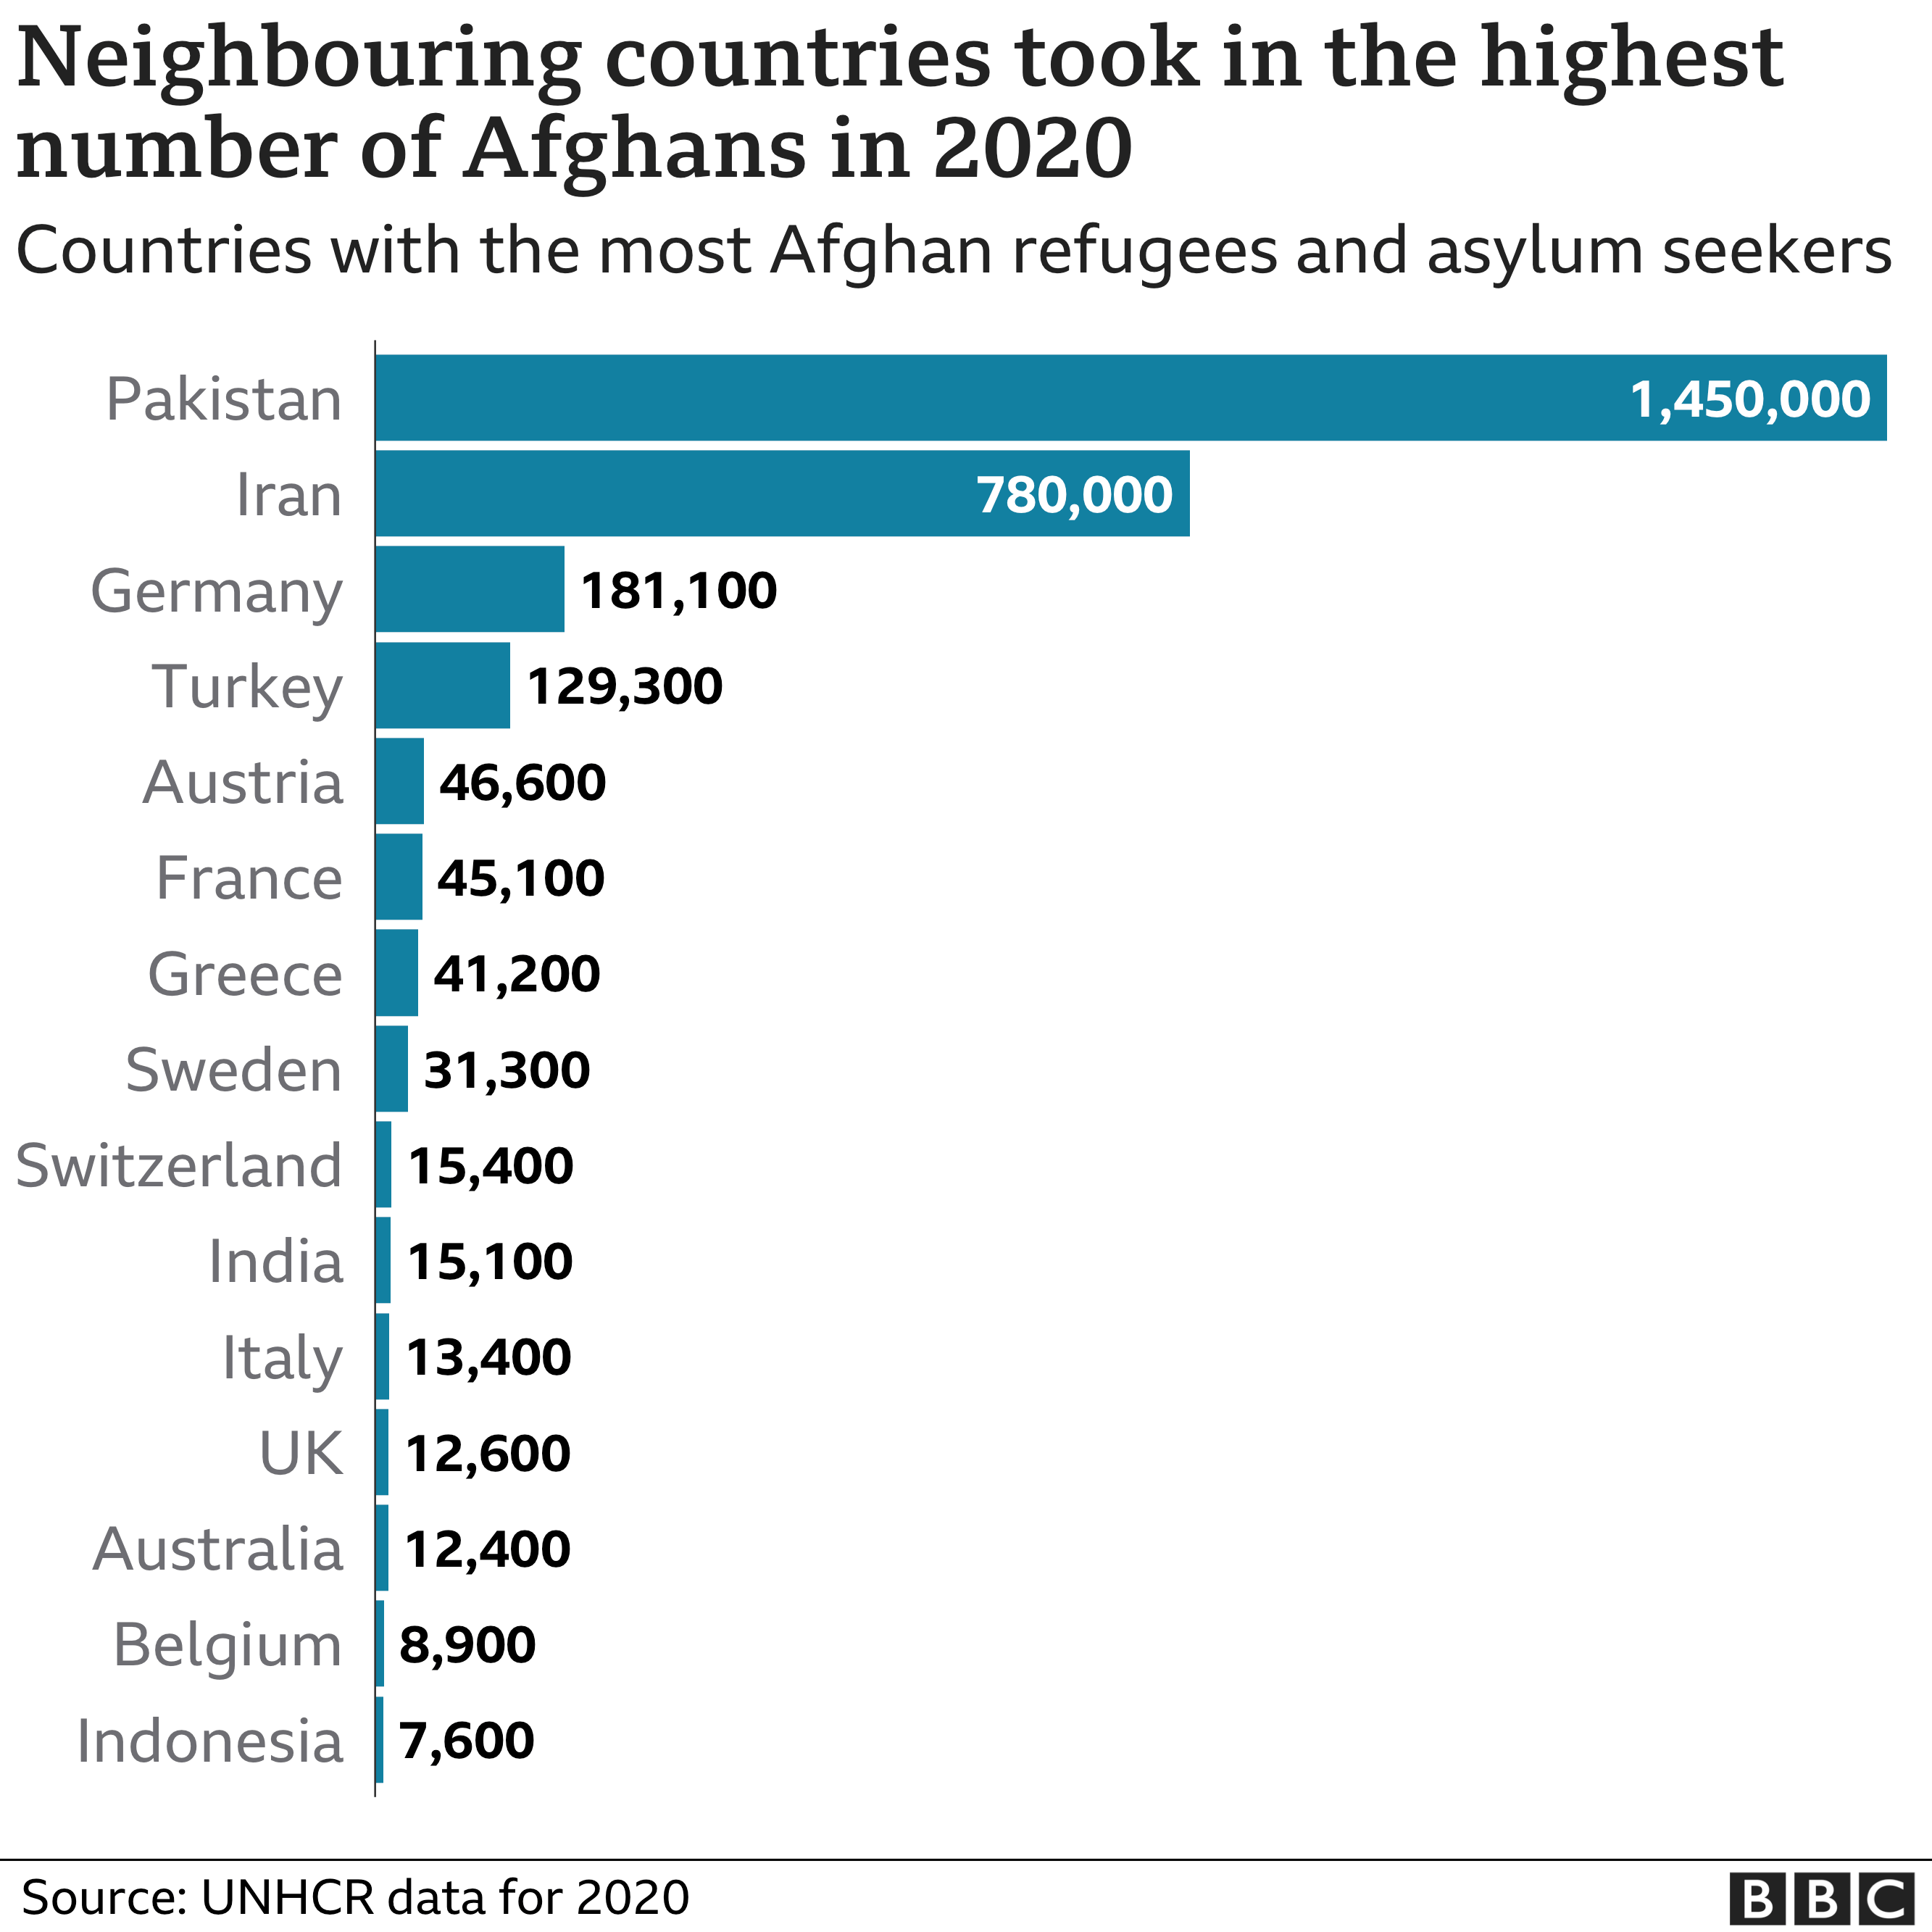 Chart showing the countries that took in the highest number of Afghan refugees and asylum seekers in 2020